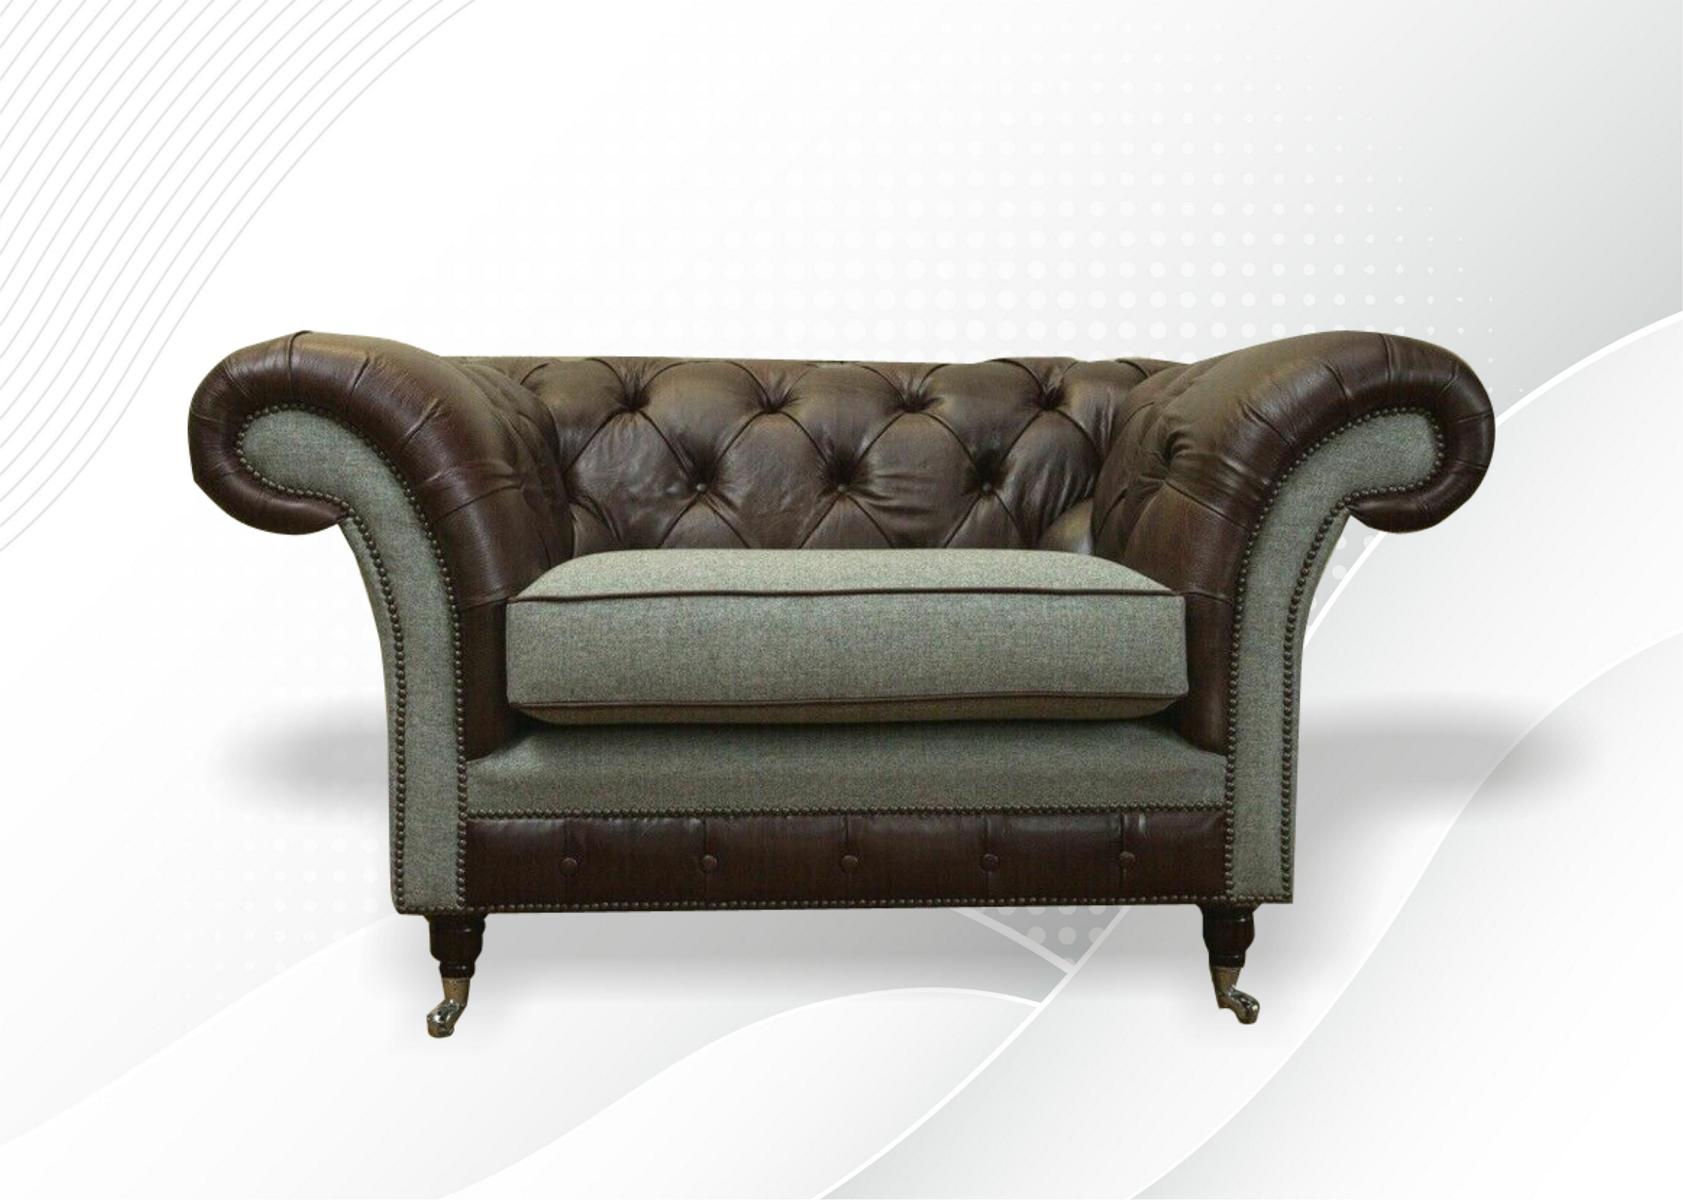 Chesterfield Sessel 1 Sitzer Sofa Couch Polster Couchen Textil Ohrensessel